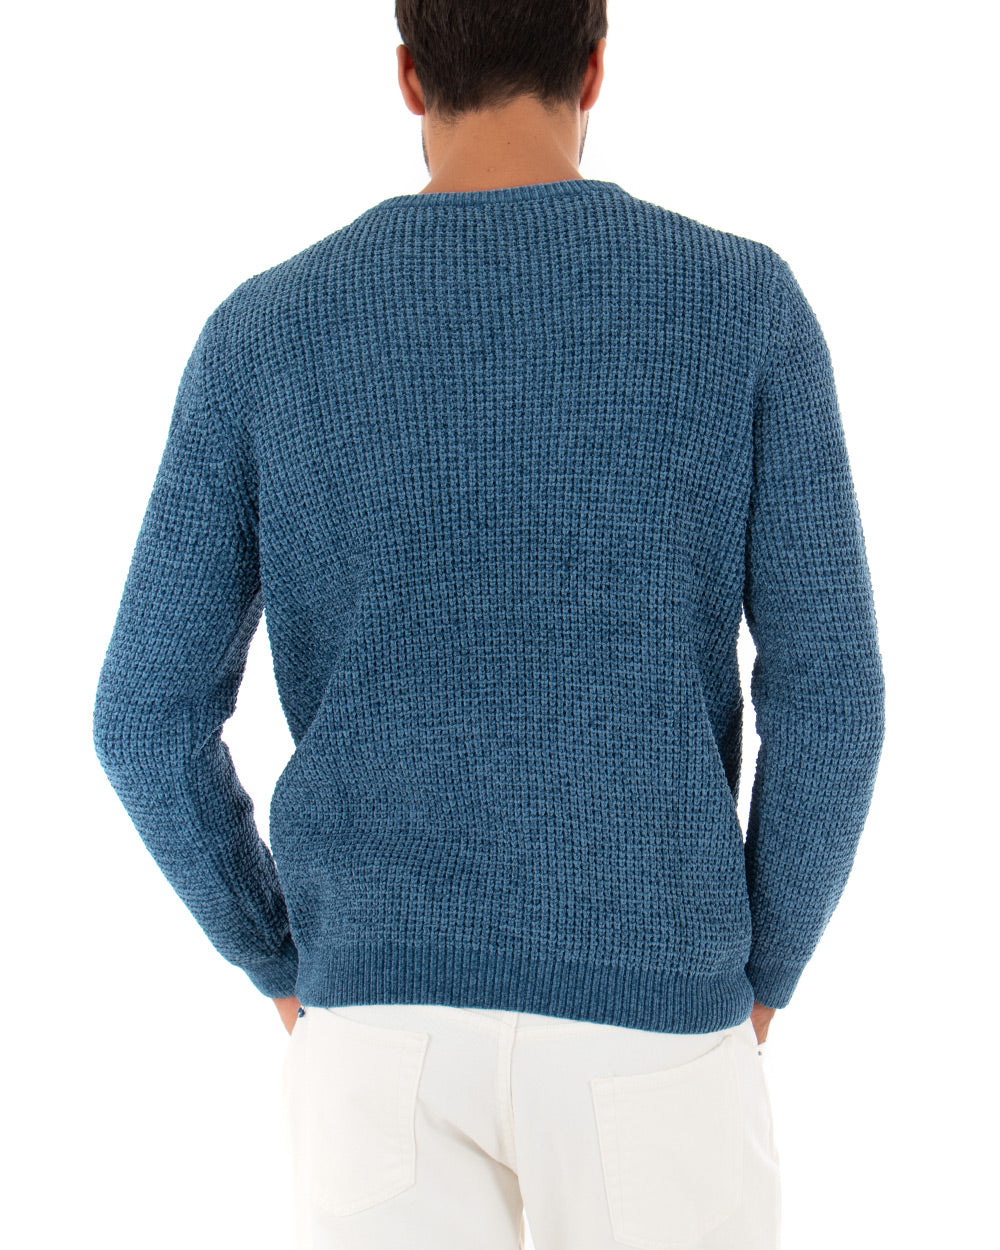 Men's Sweater Long Sleeves Chenille Solid Color Avion Round Neck GIOSAL